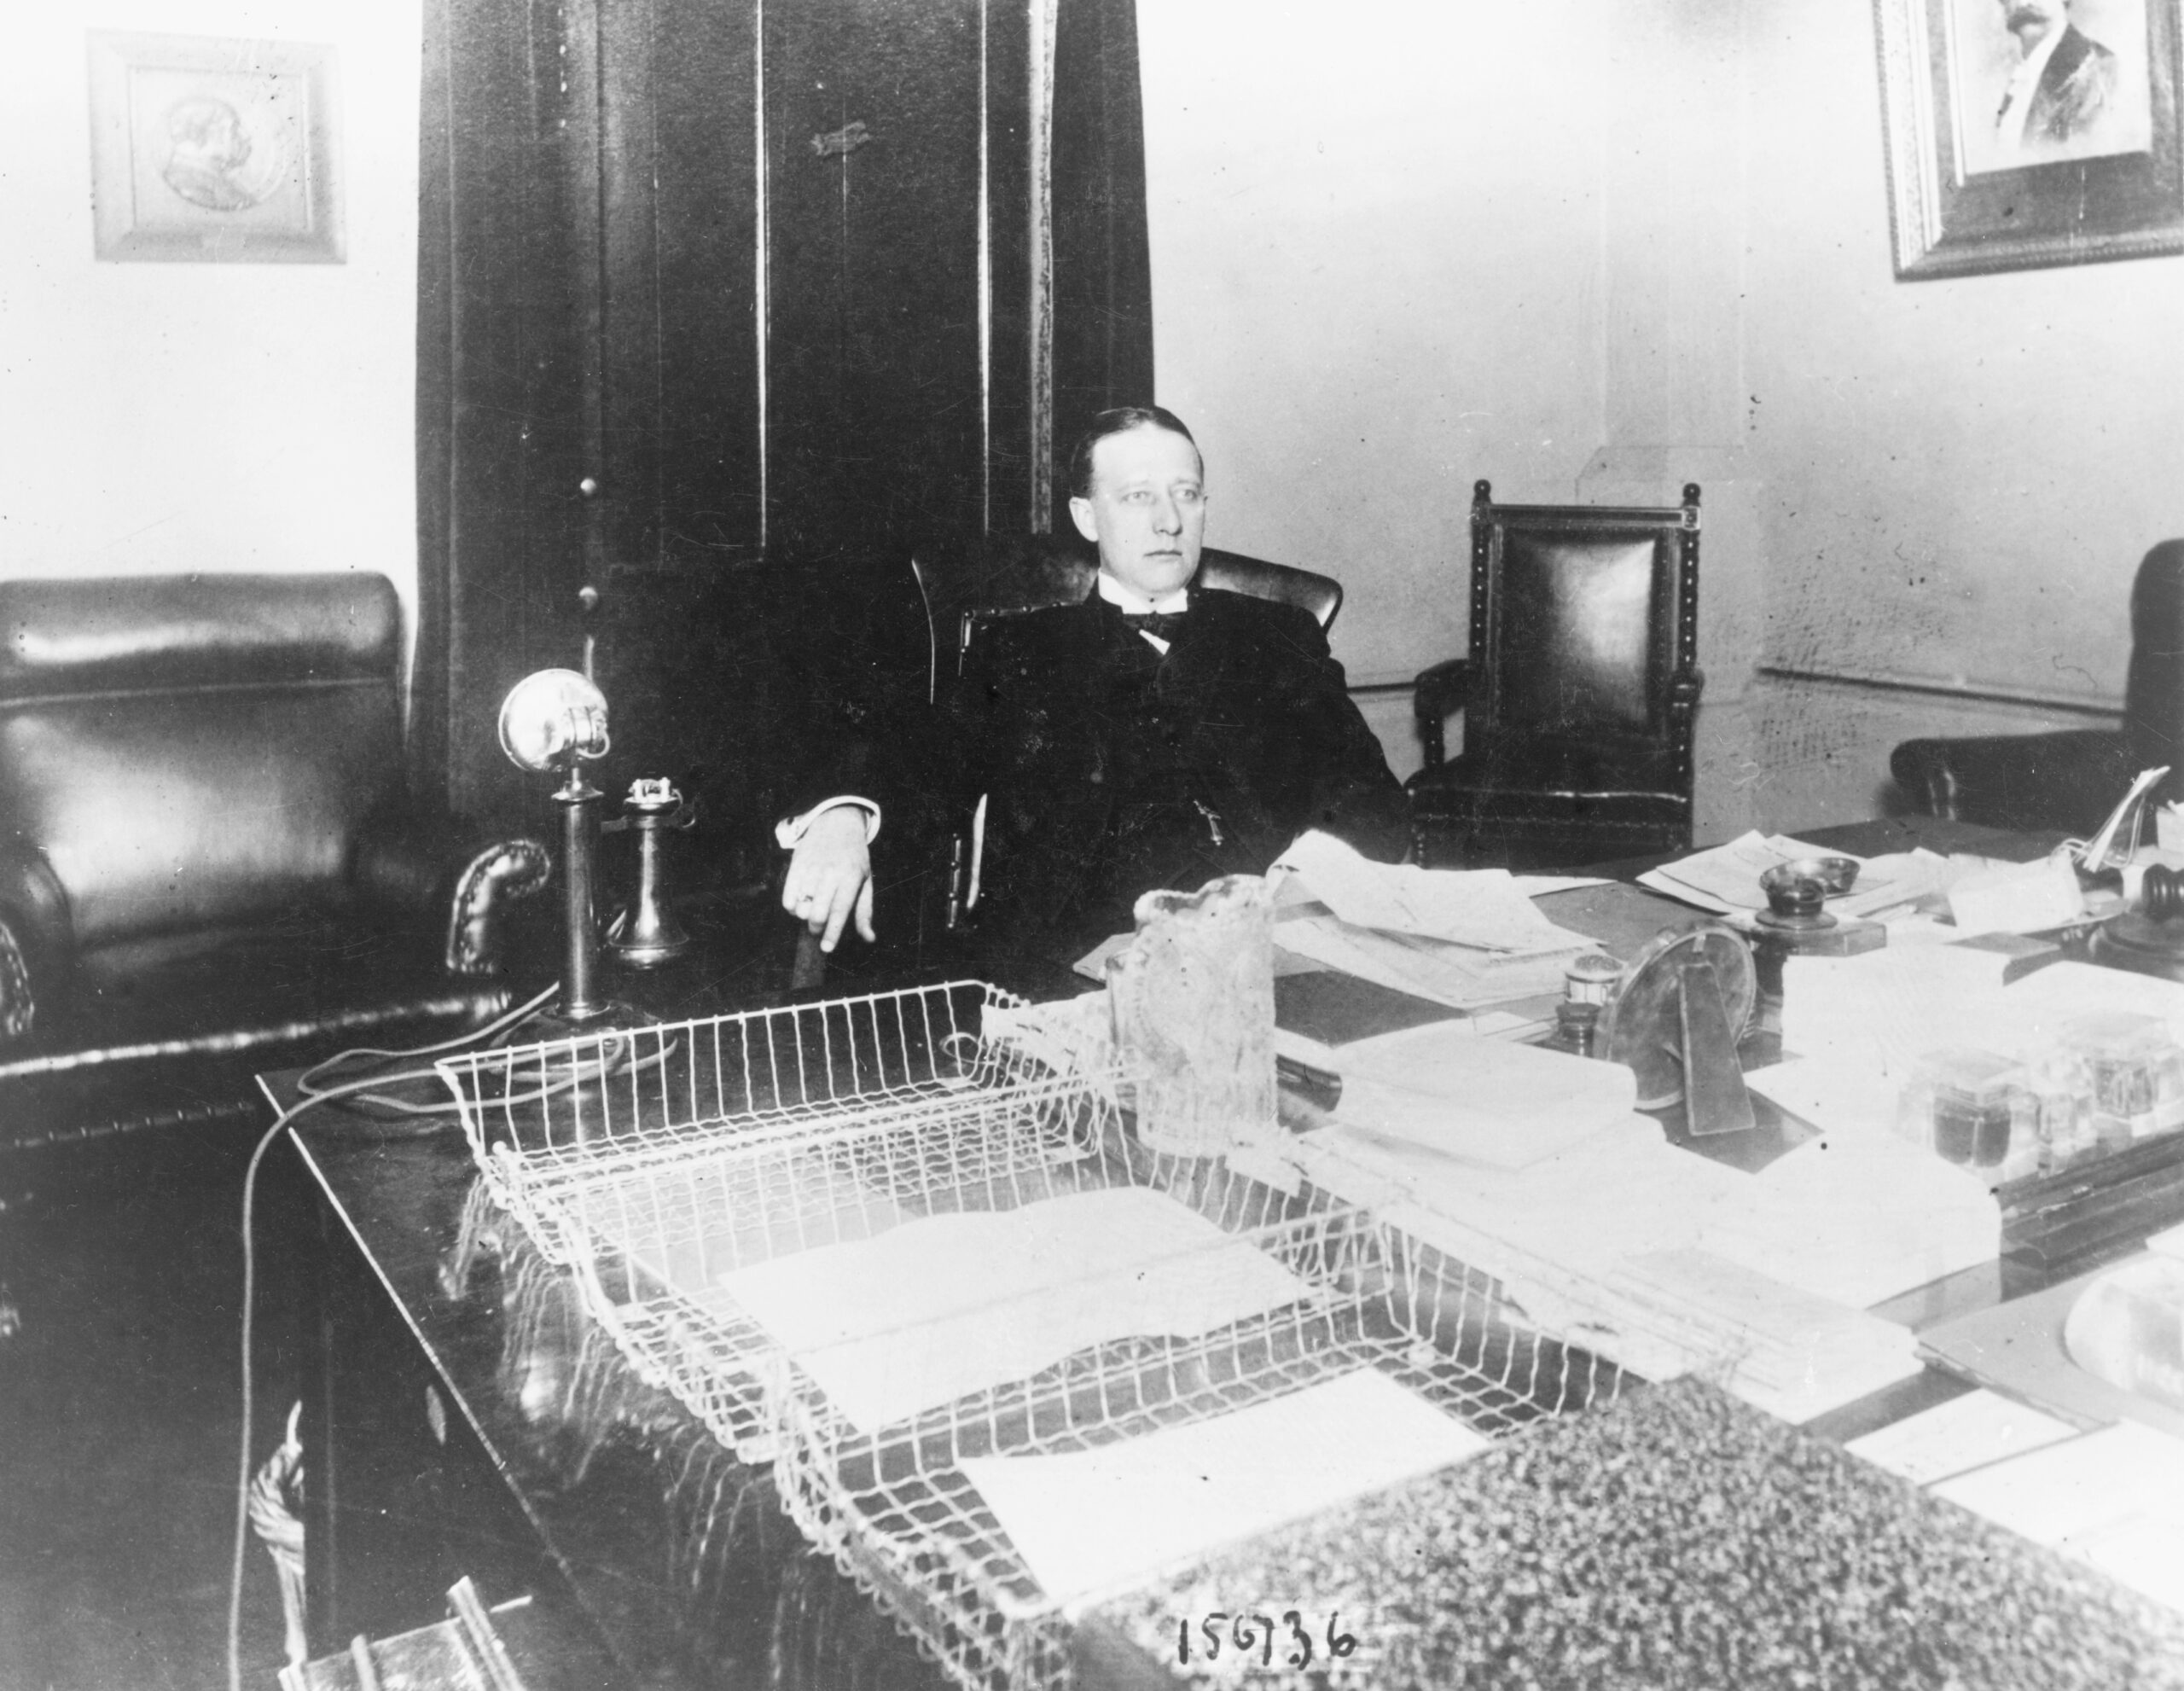 Al Smith seated at his desk as a New York State Senator in 1913